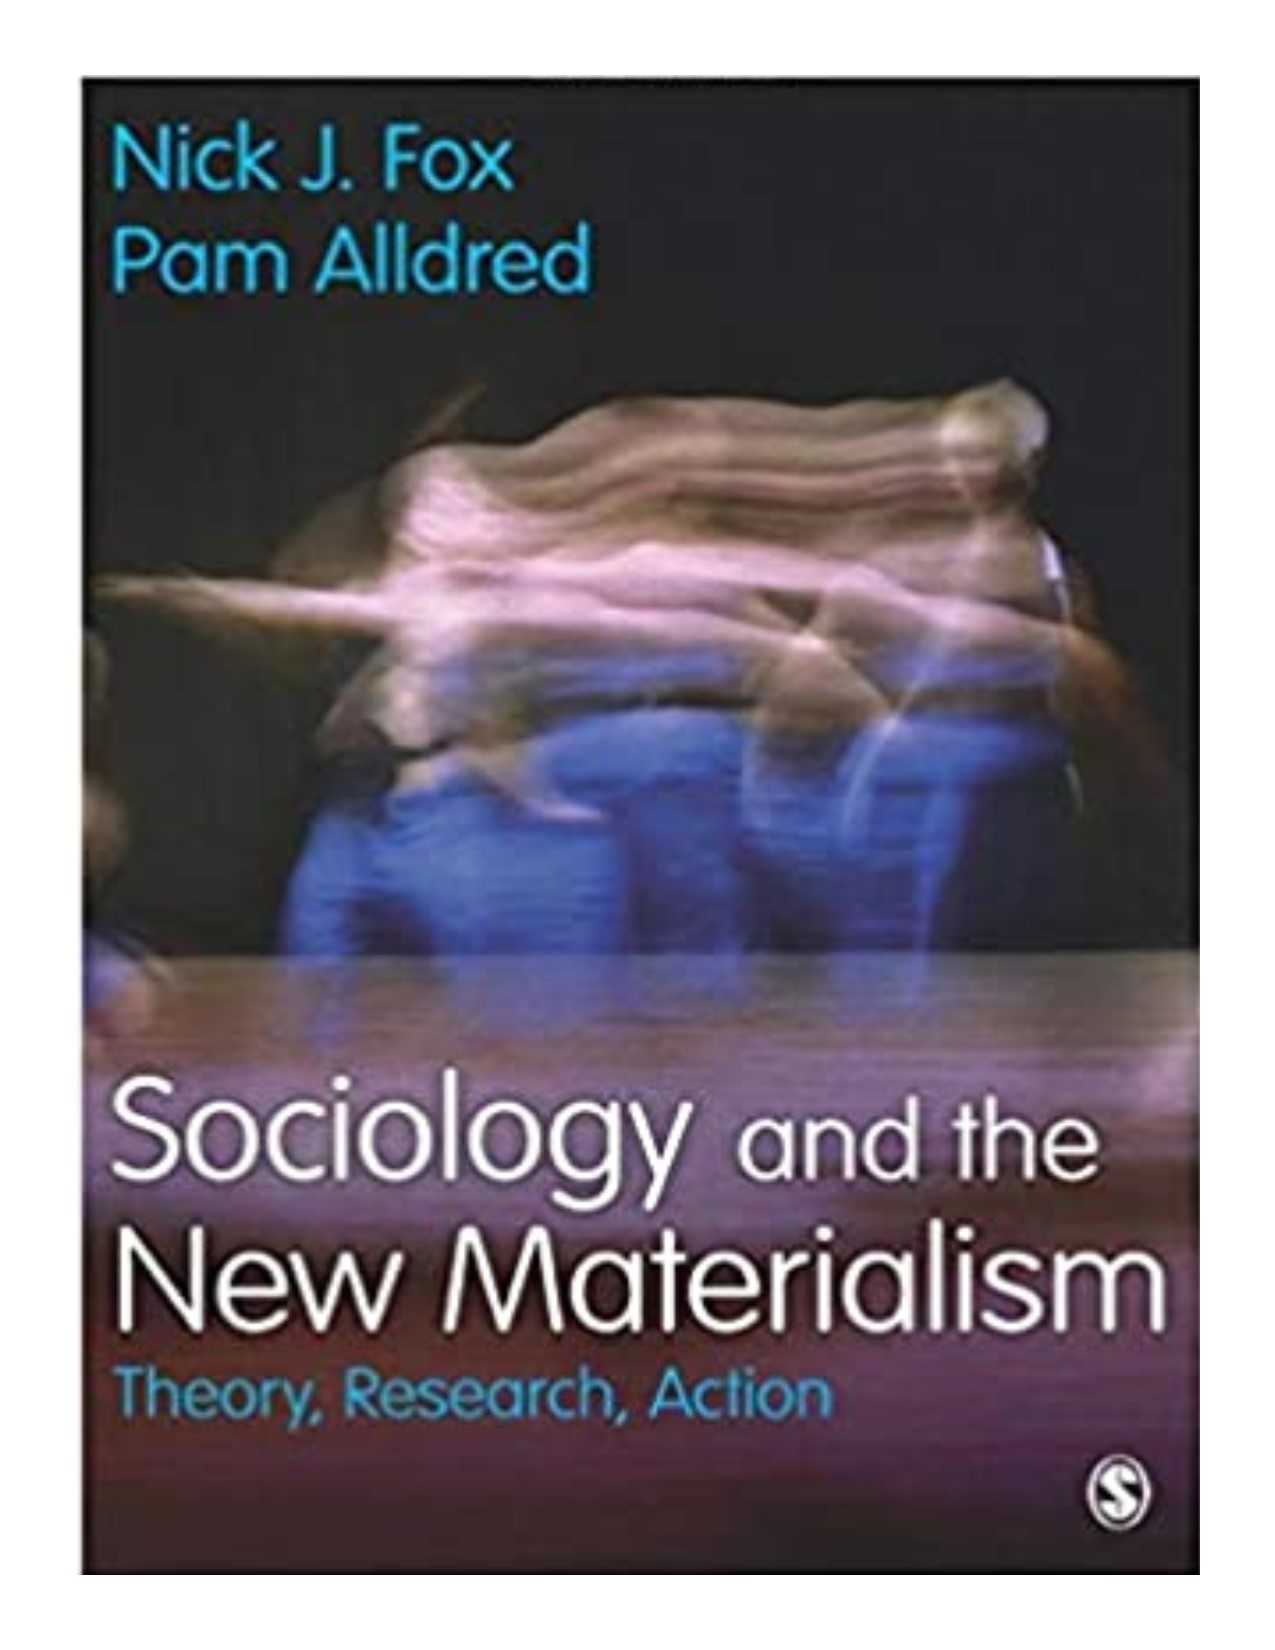 Sociology and the new materialism theory, research, action